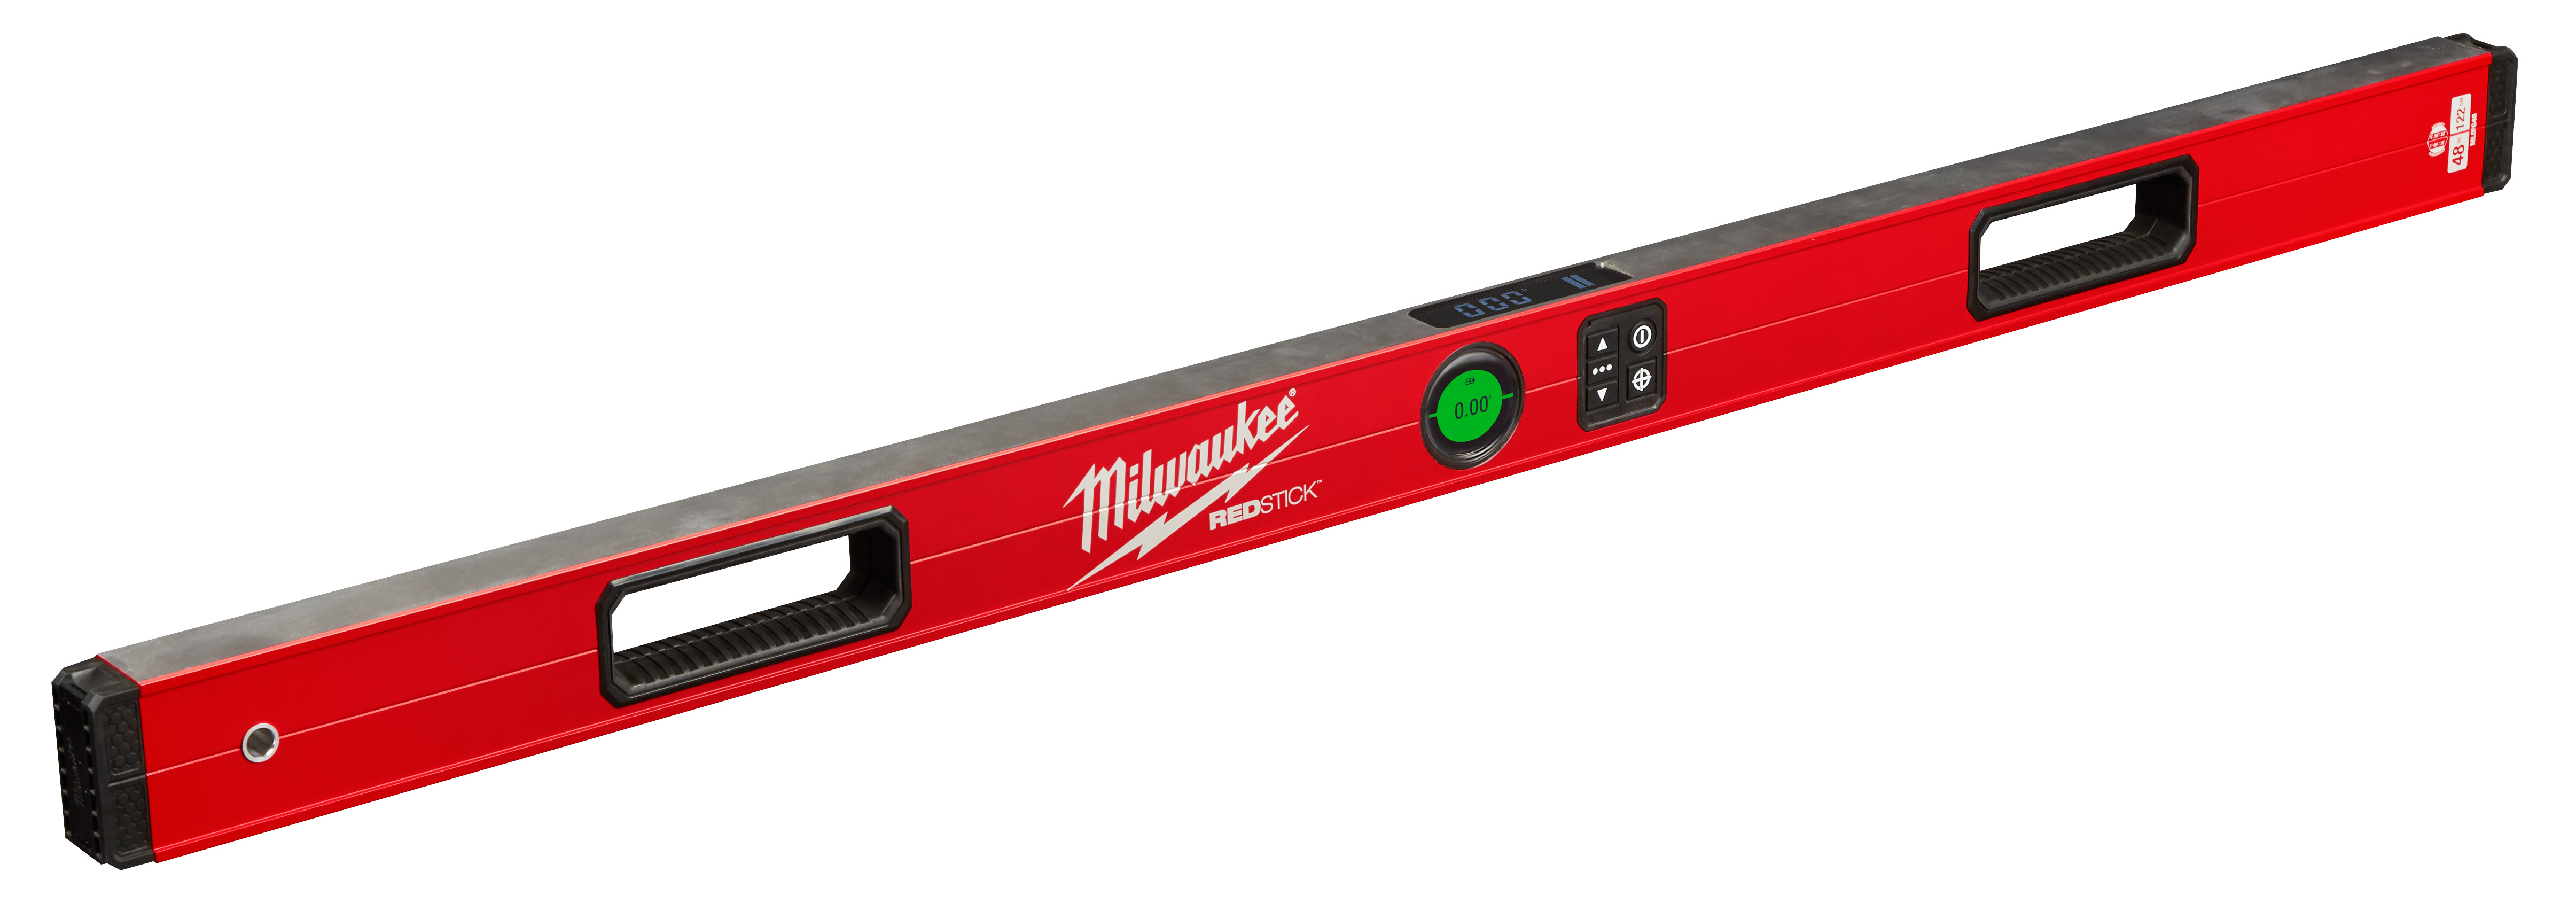 48 in. REDSTICK Digital Level with PINPOINT Measurement Technology